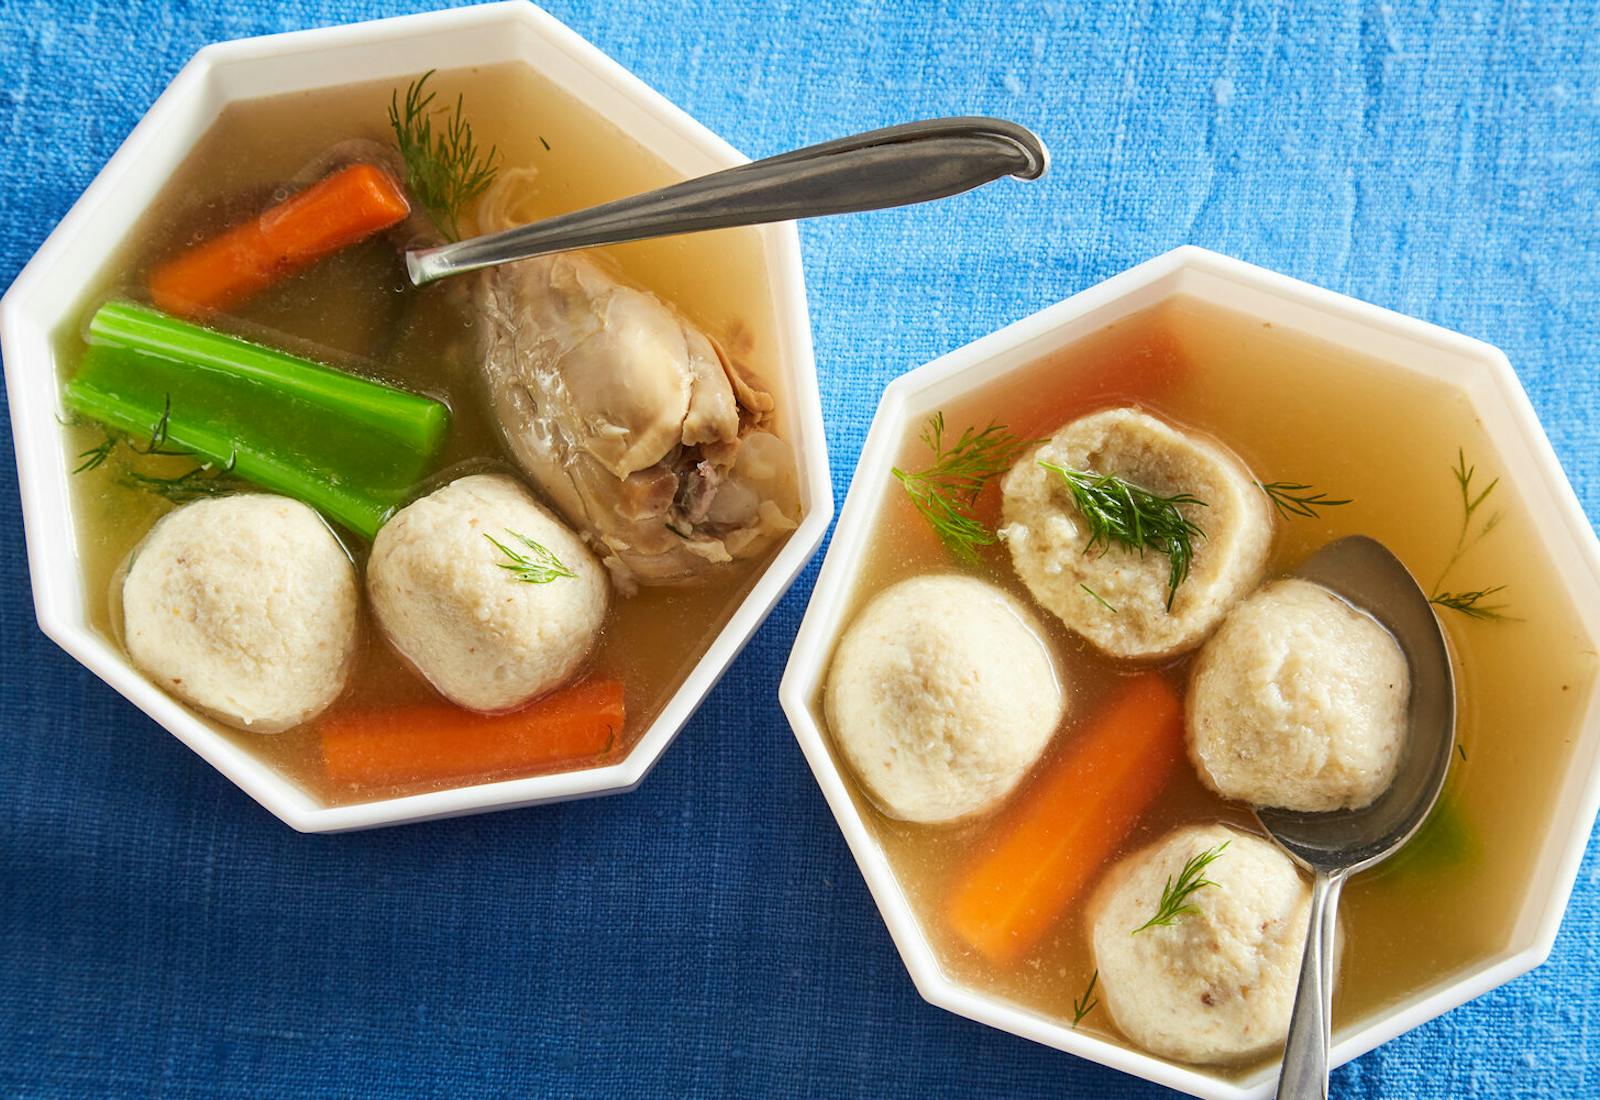 Matzo ball soup sprinkled with dill in two geometric bowls atop blue tablecloth.